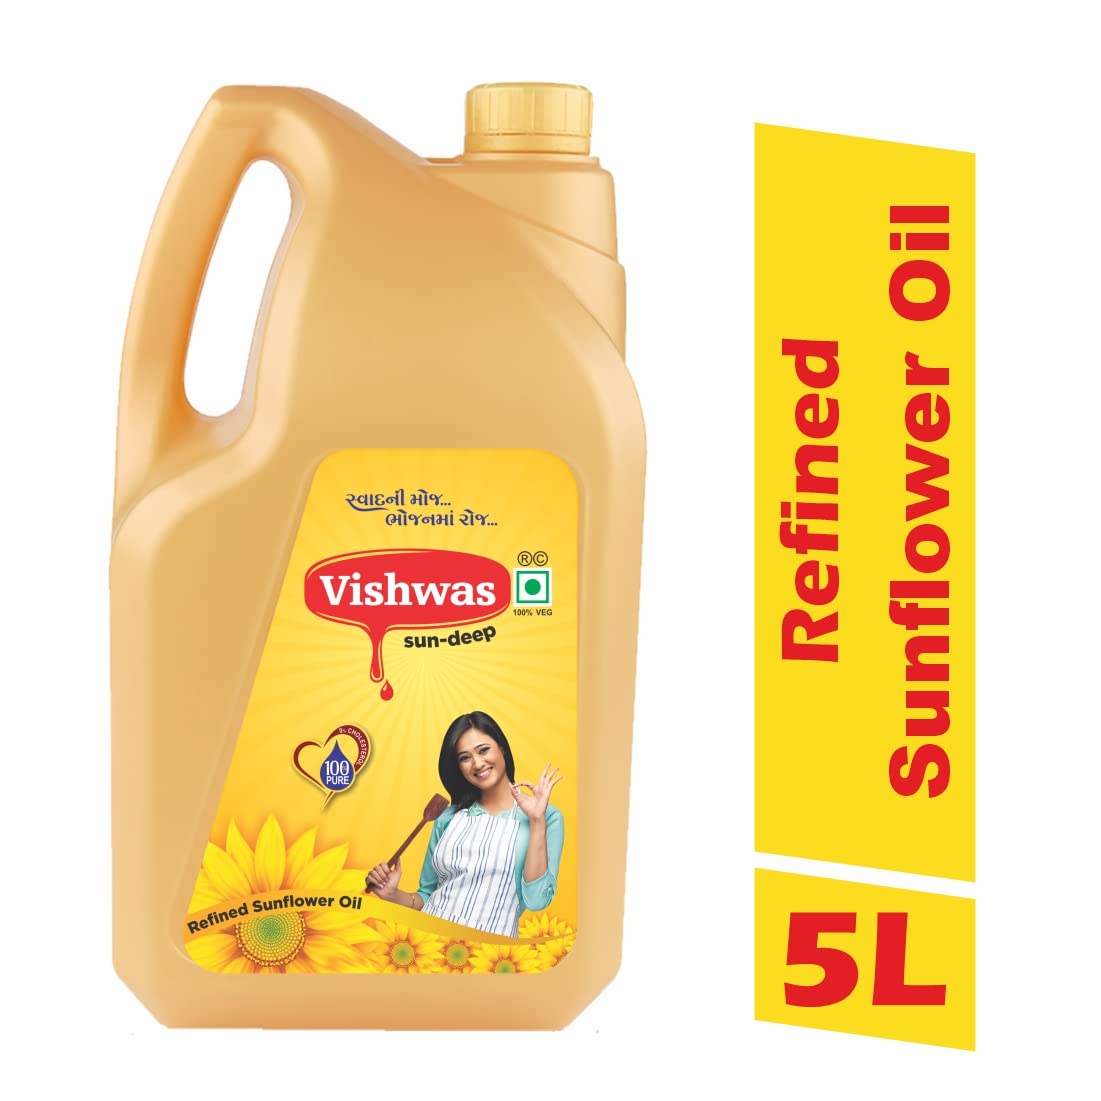 Vishwas Sunflower Oil Jar & Pouch | Refined Sunflower Oil 100% Natural And Pure Sunflower Cooking Oil